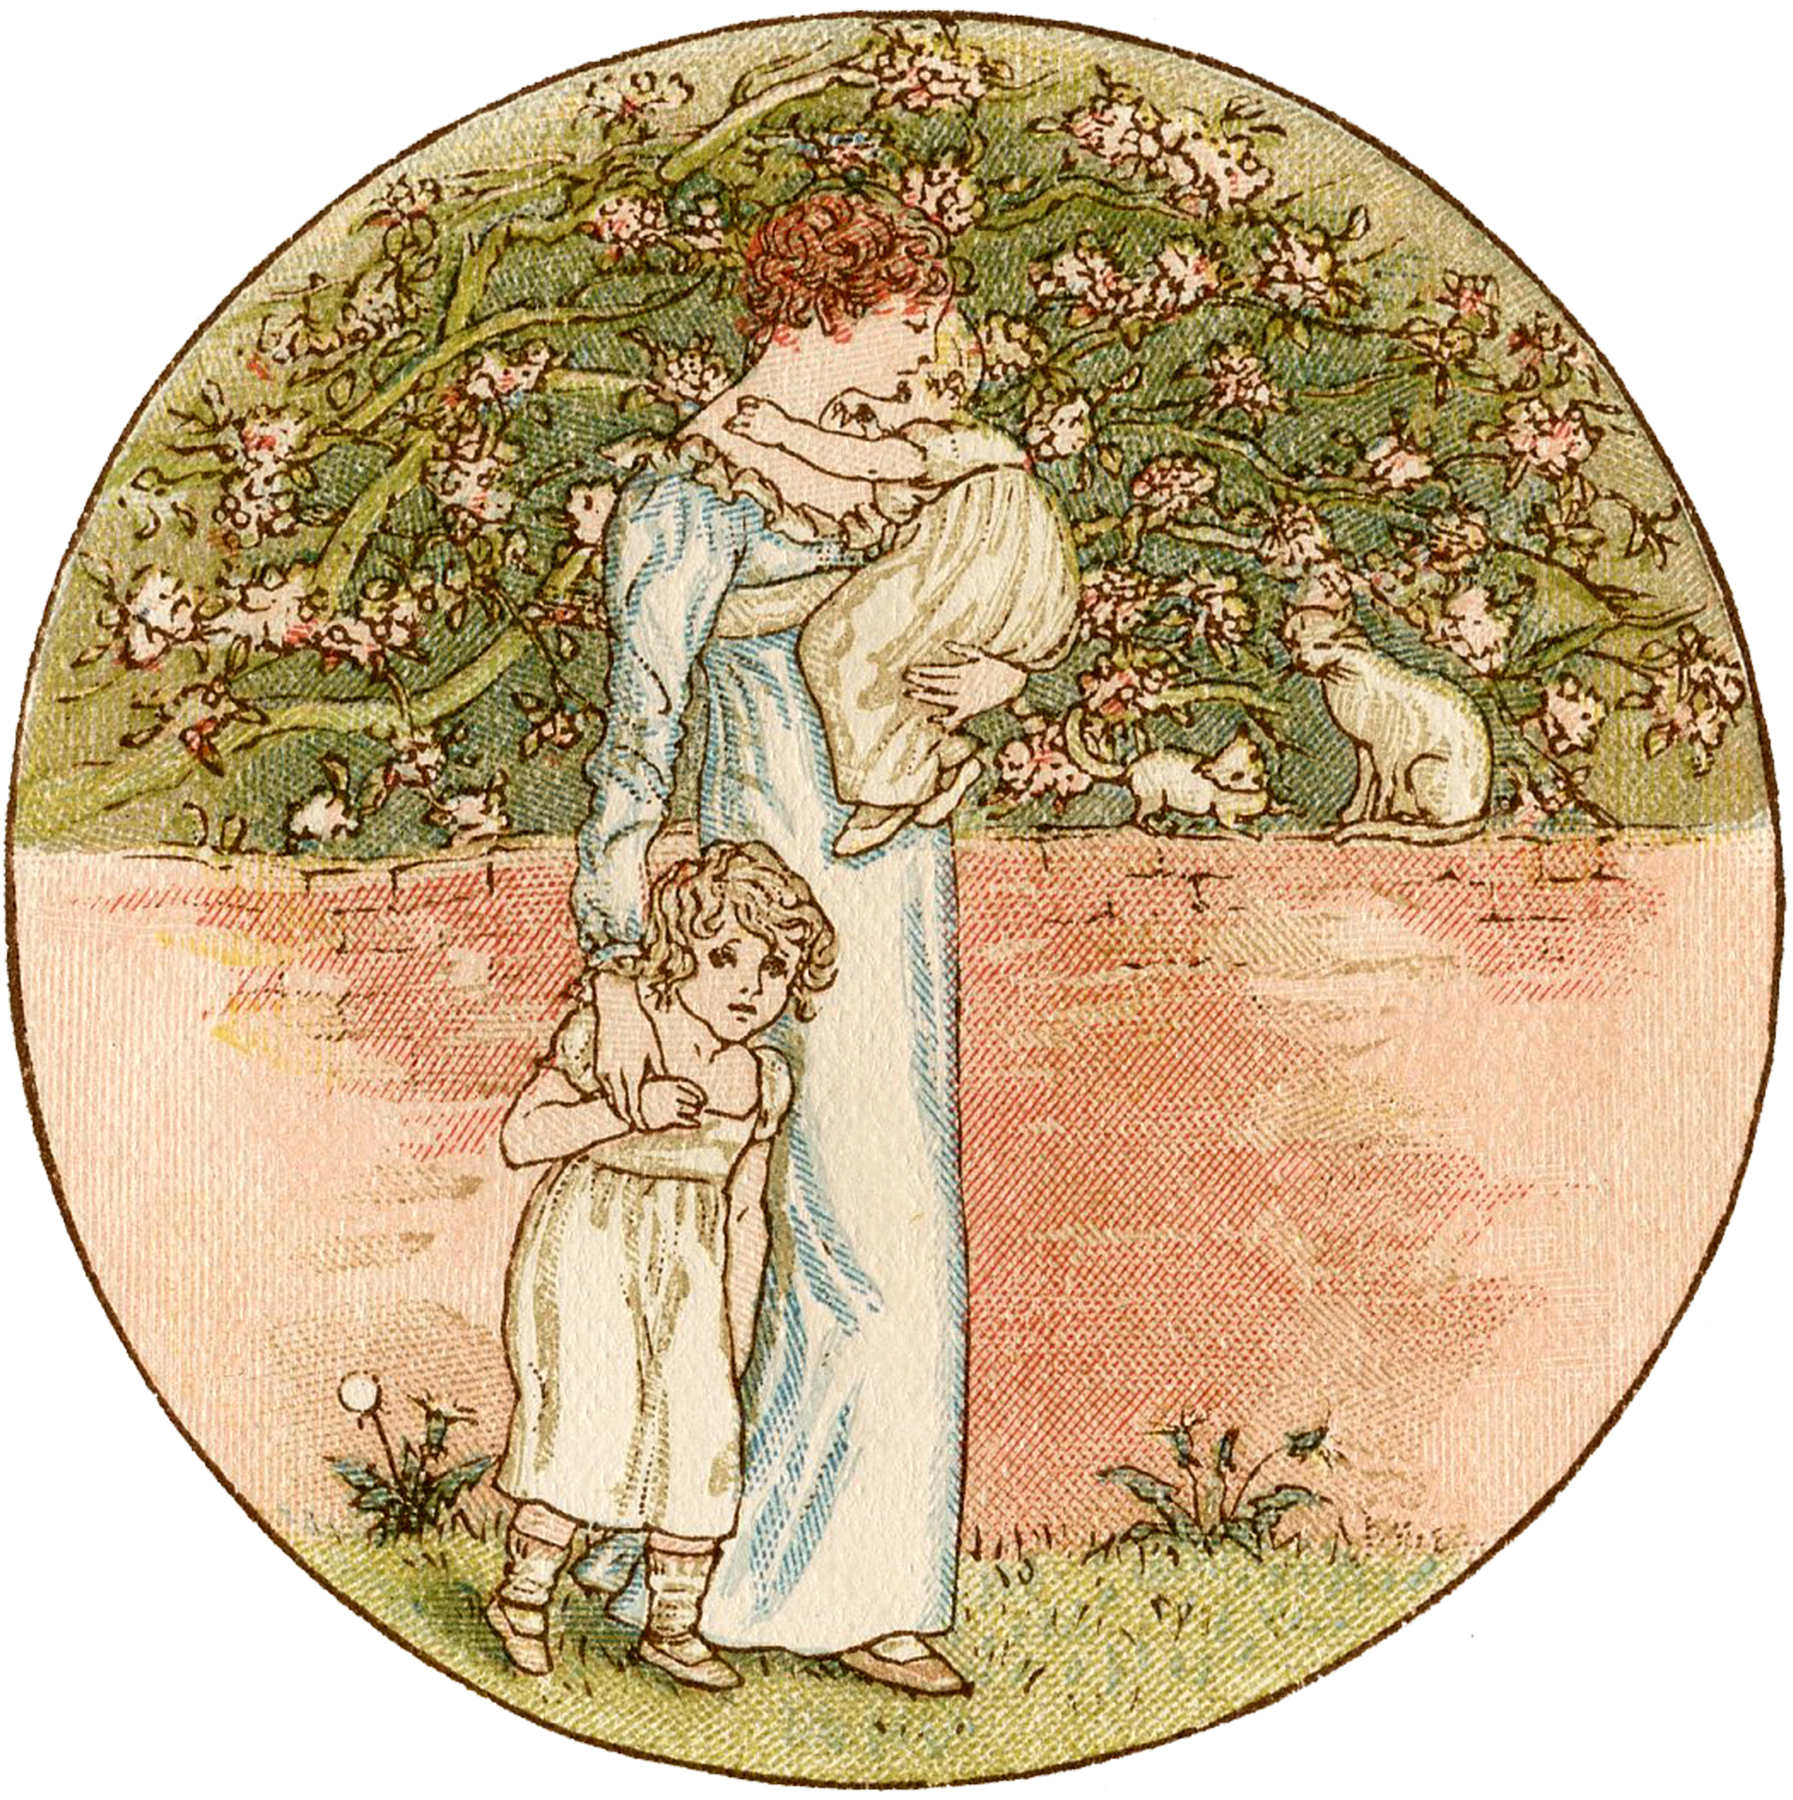 6 Mother's Day Illustrations by Kate Greenaway! - The Graphics Fairy